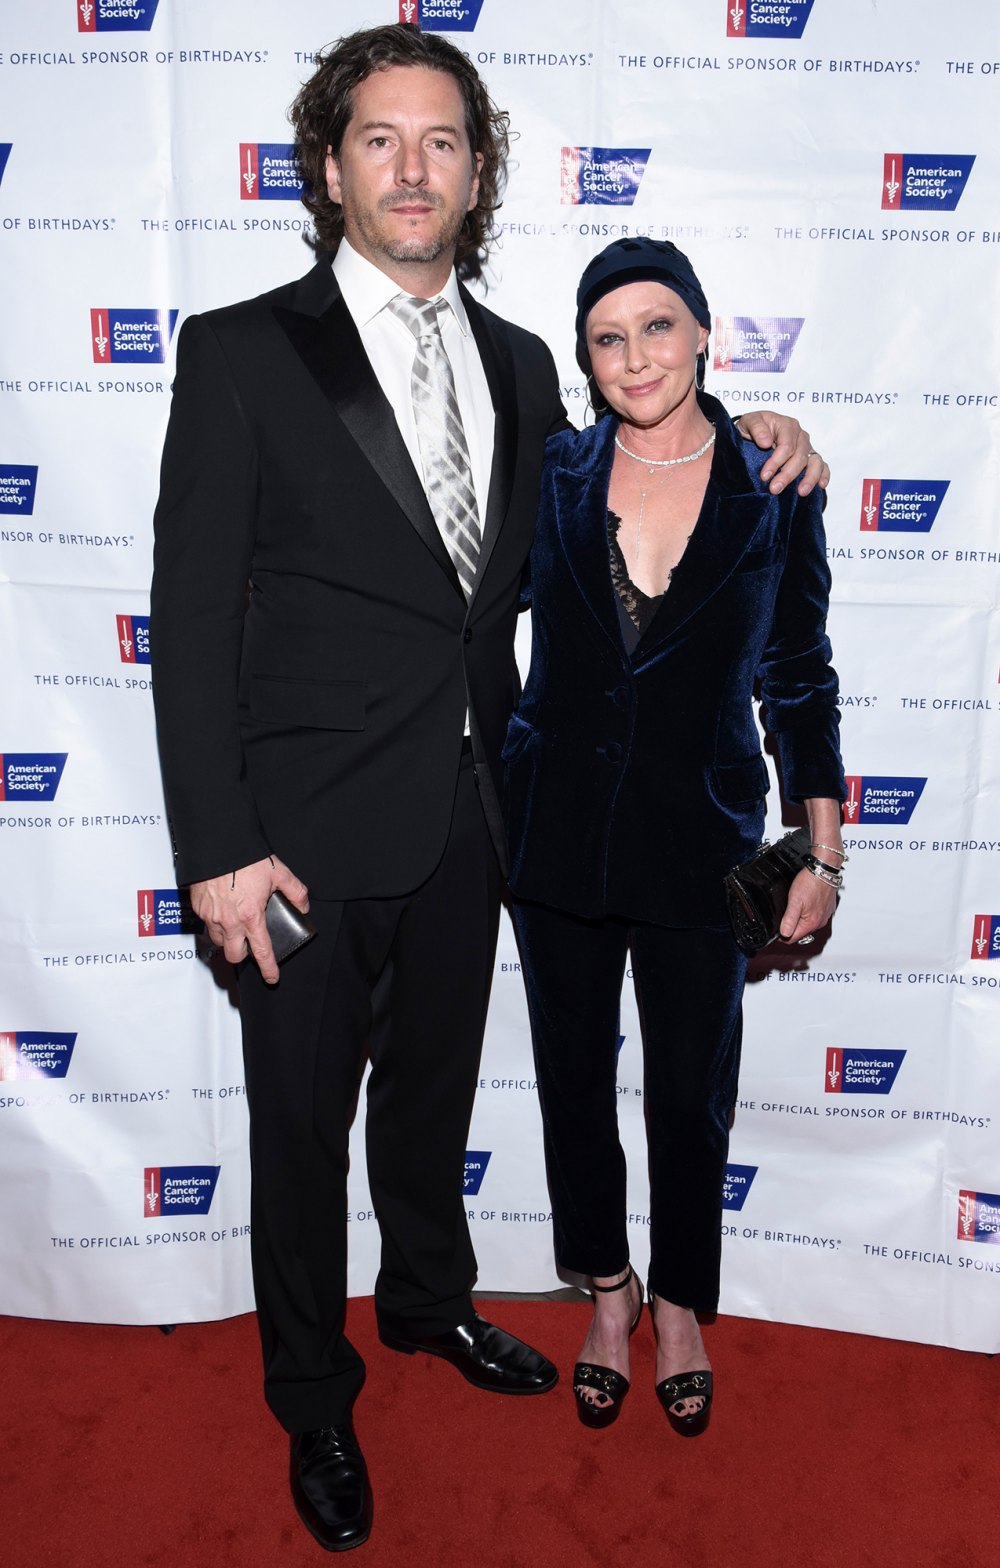 Shannen Doherty Reveals She Had Brain Surgery After Discovering Her Husband Kurt Iswarienko Cheated